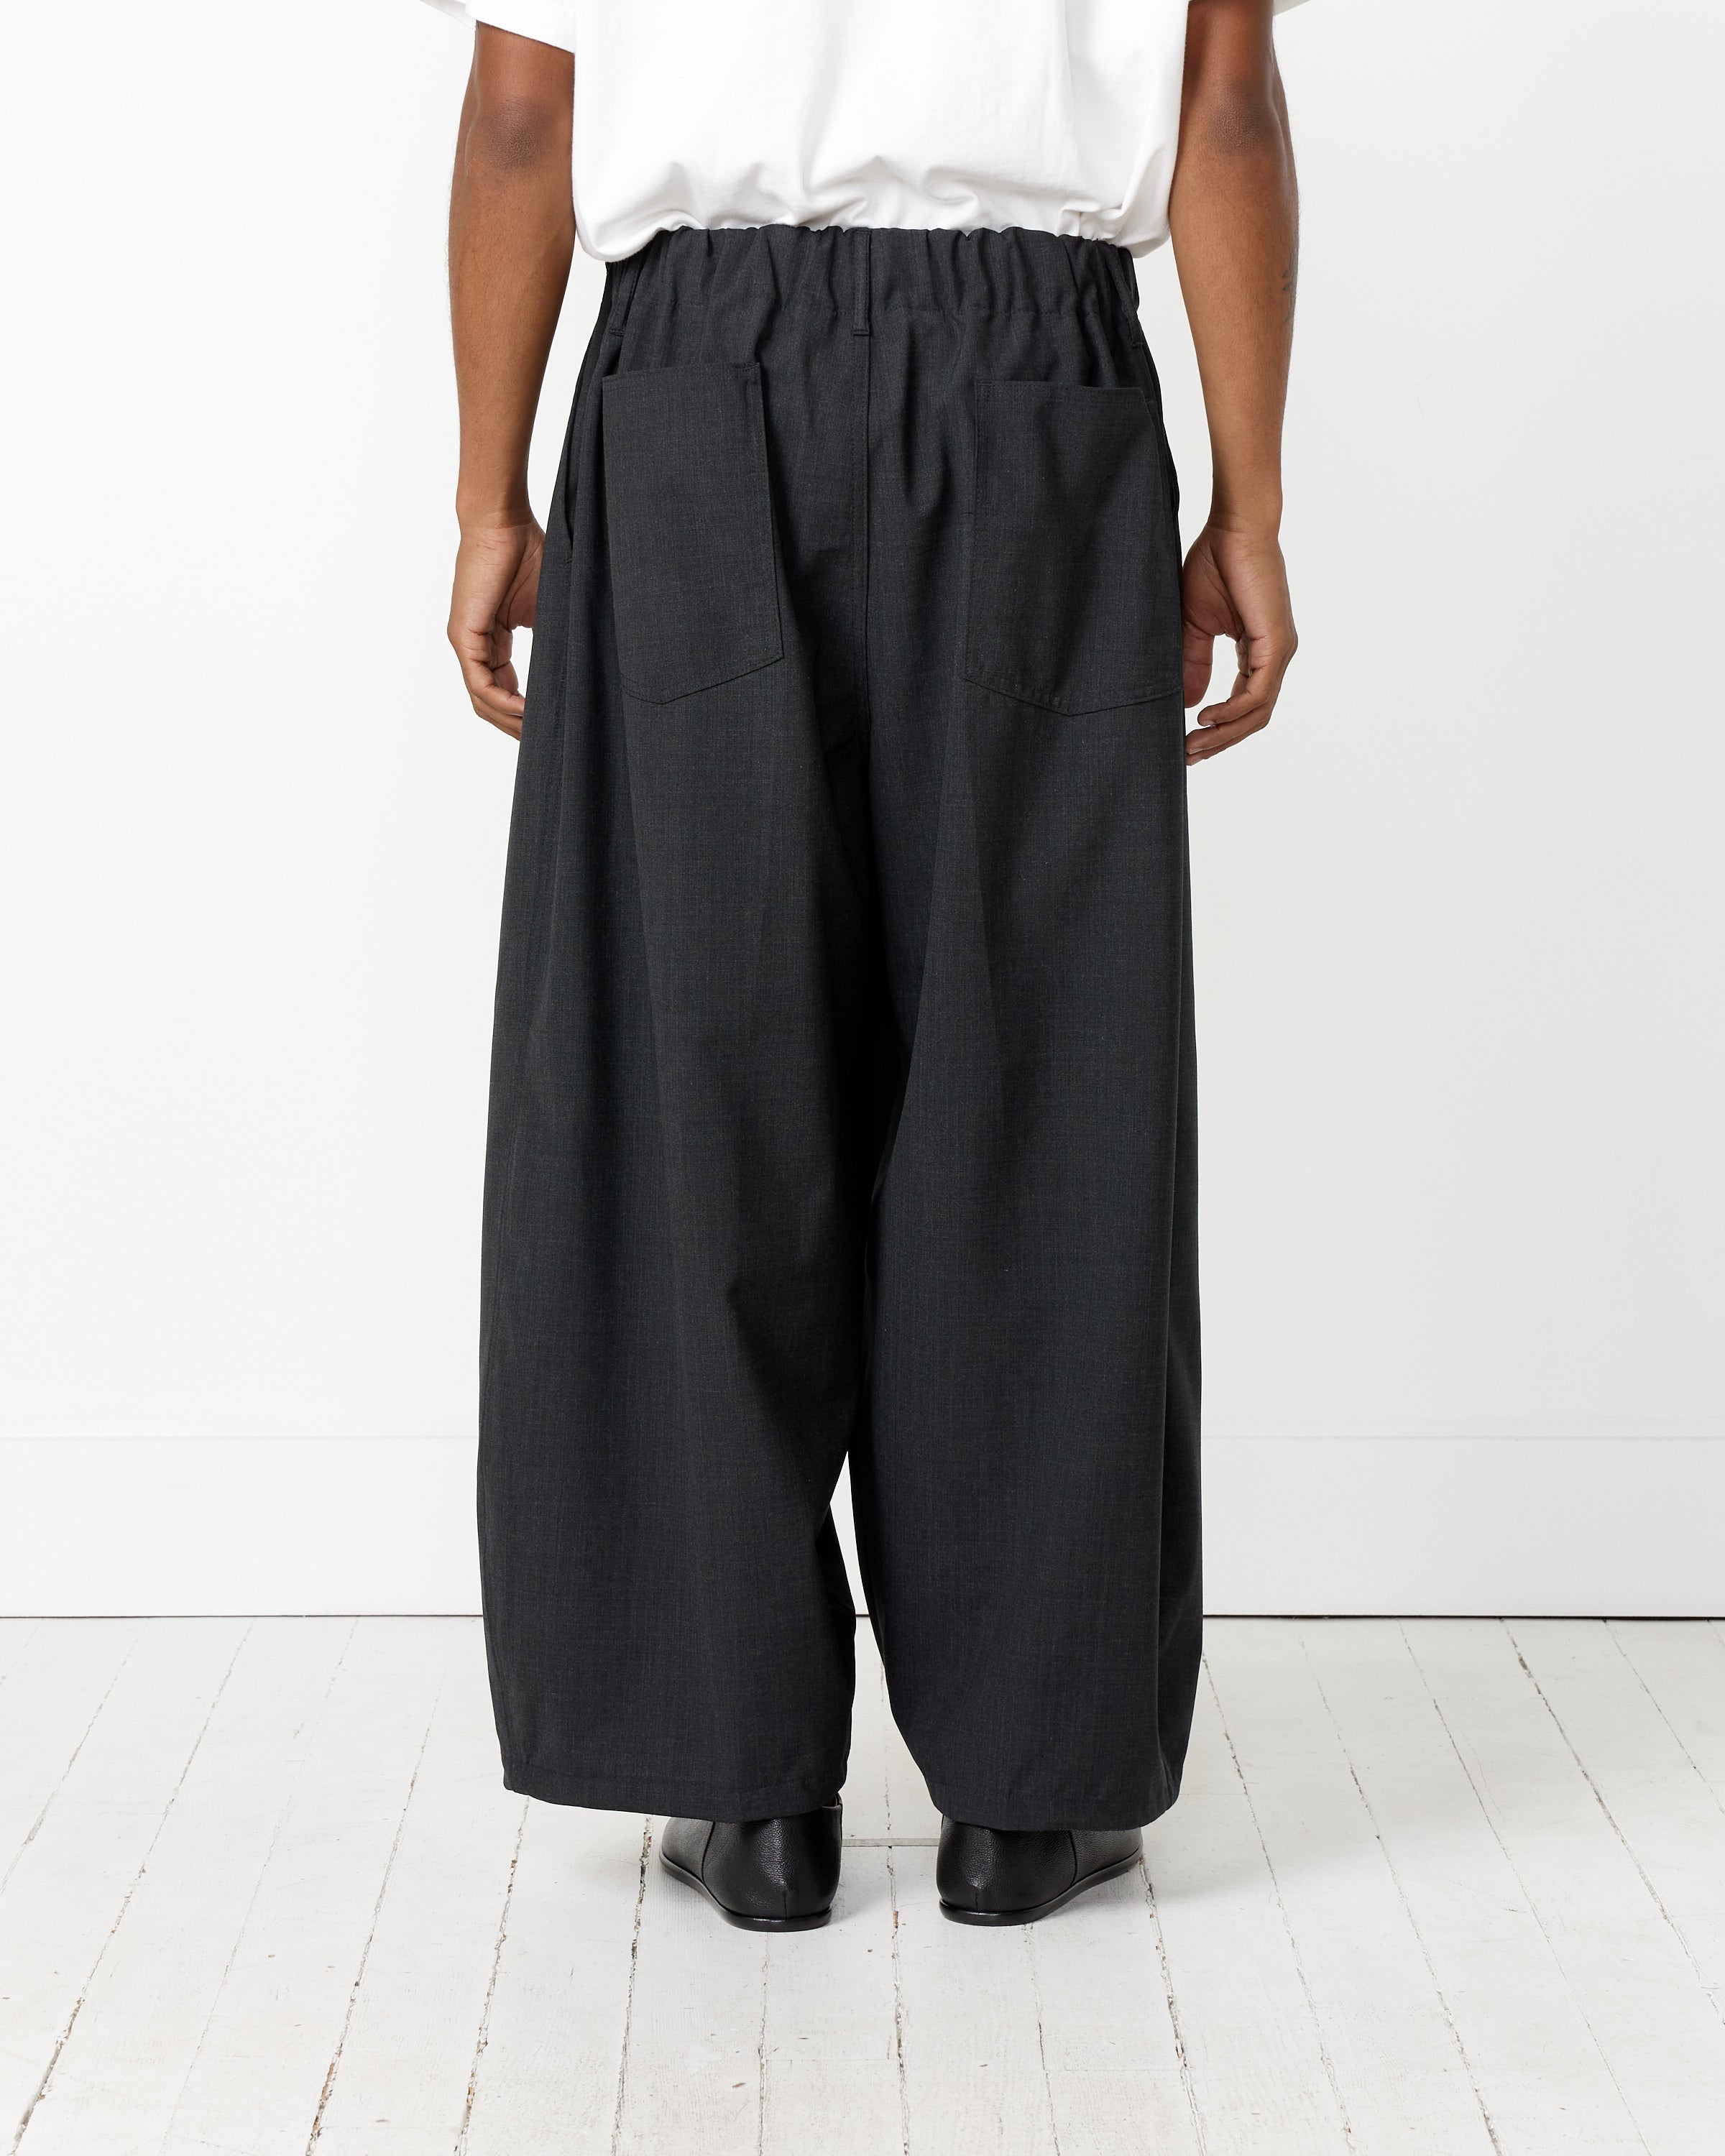 Mohawk General Store | Sillage | Essential Circular Pants in Anthracite